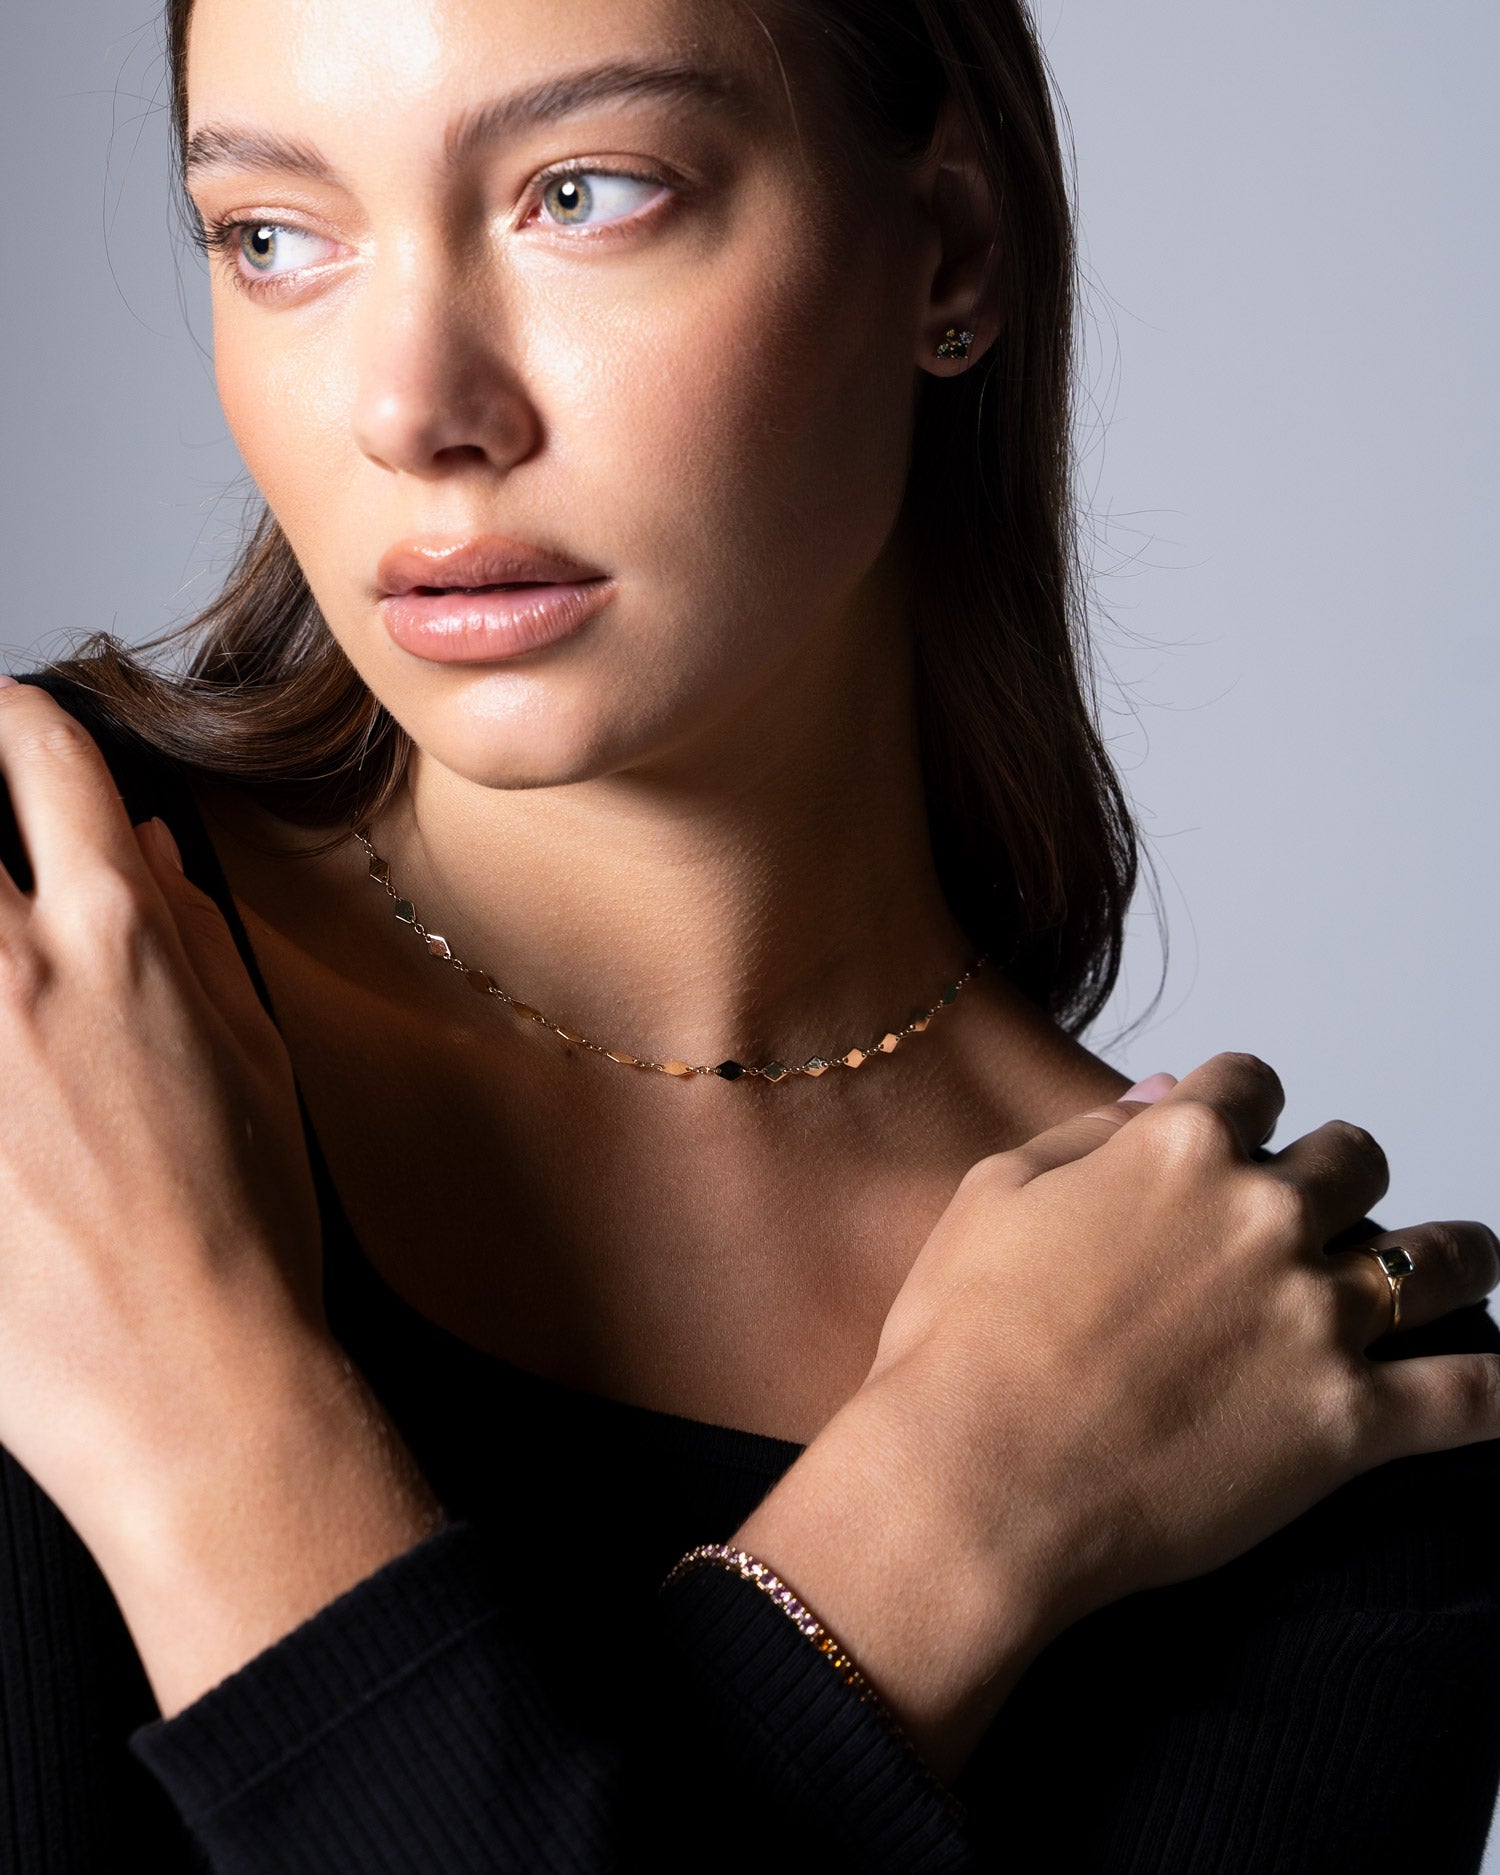 solid 9 karat yellow gold kite necklace worn by Ellie Brinkman for the claude and me Sapphire Brilliance collection.